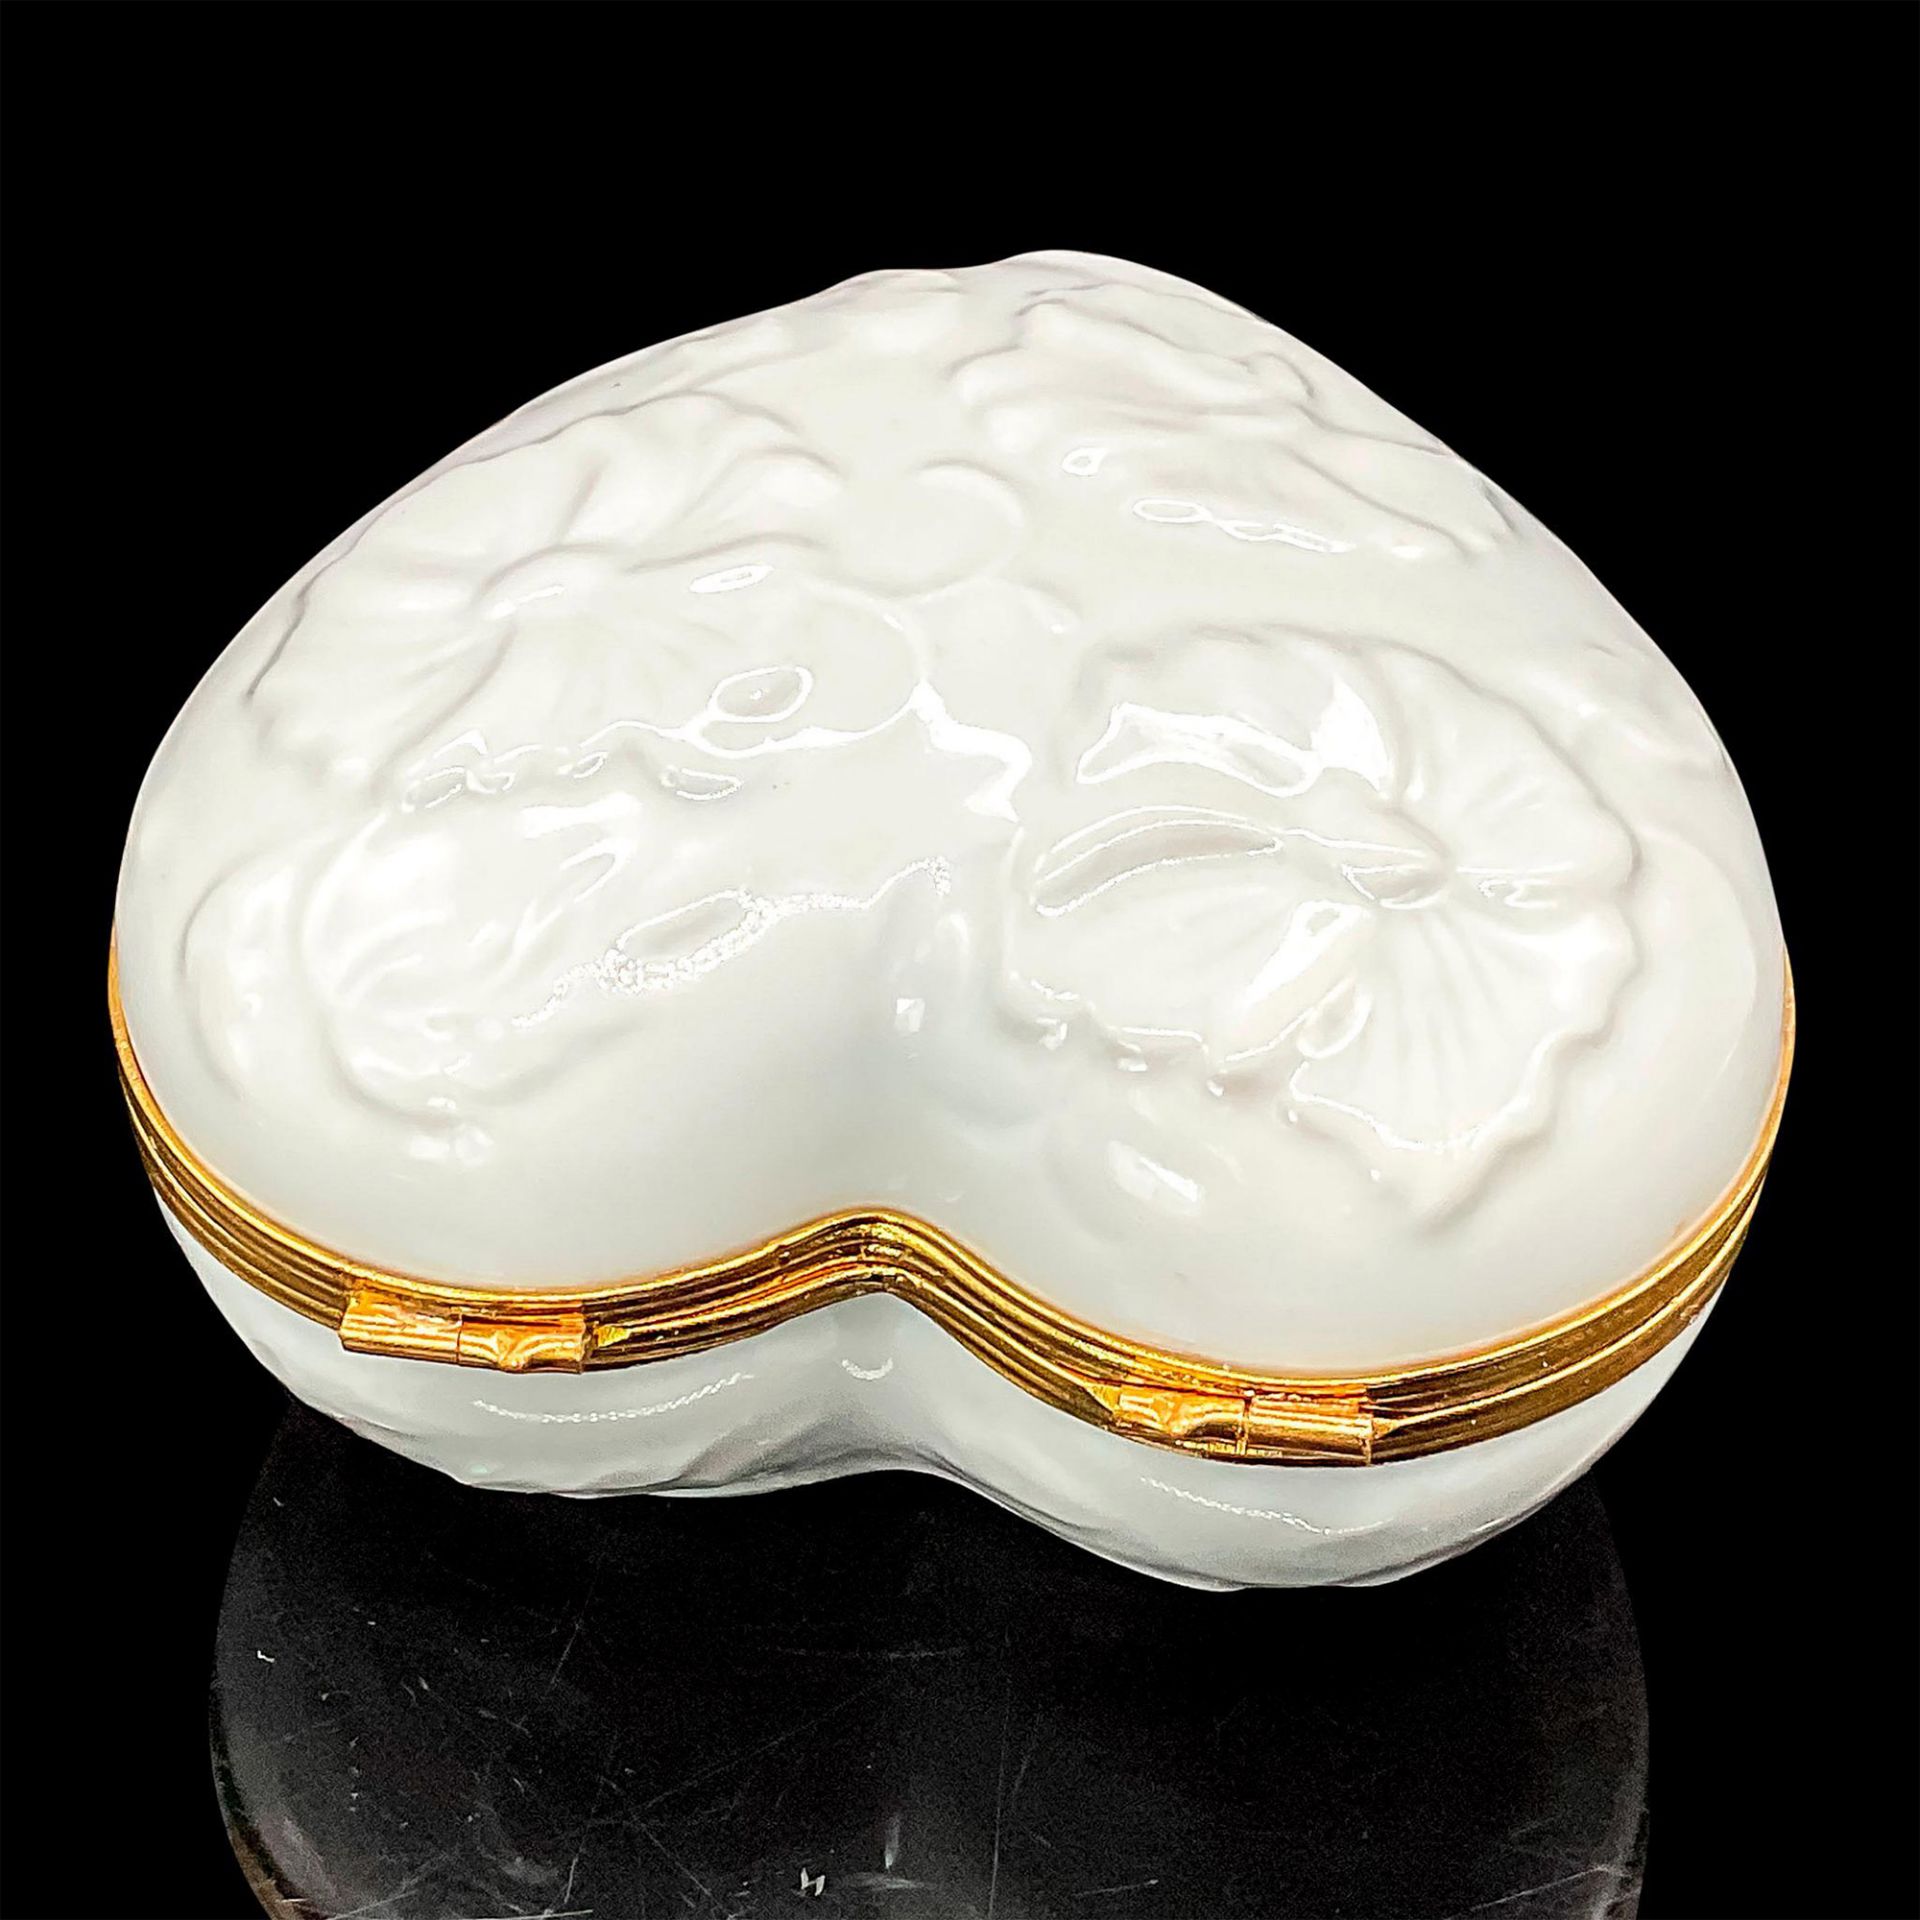 Chamart Limoges Porcelain Heart Box, White and Gold - Image 2 of 3